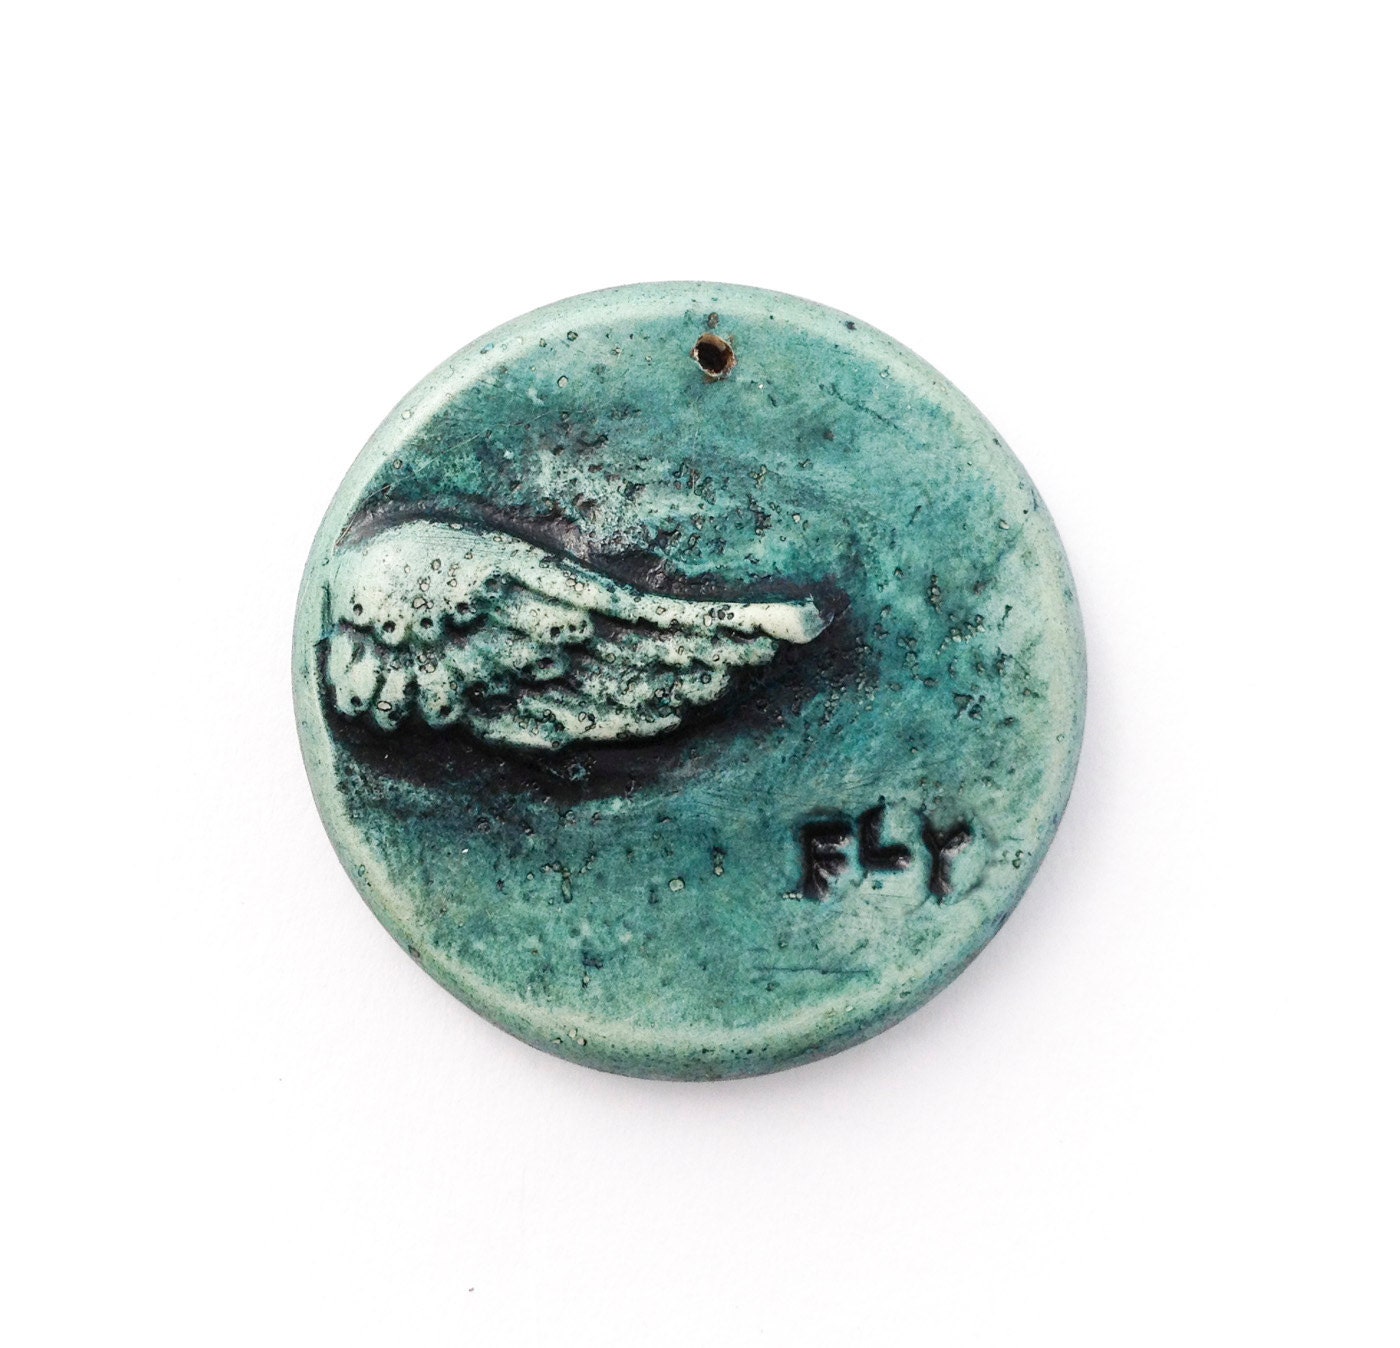 Distressed Grungy Teal Patina Wing Polymer Clay Pendant - Distlefunk2